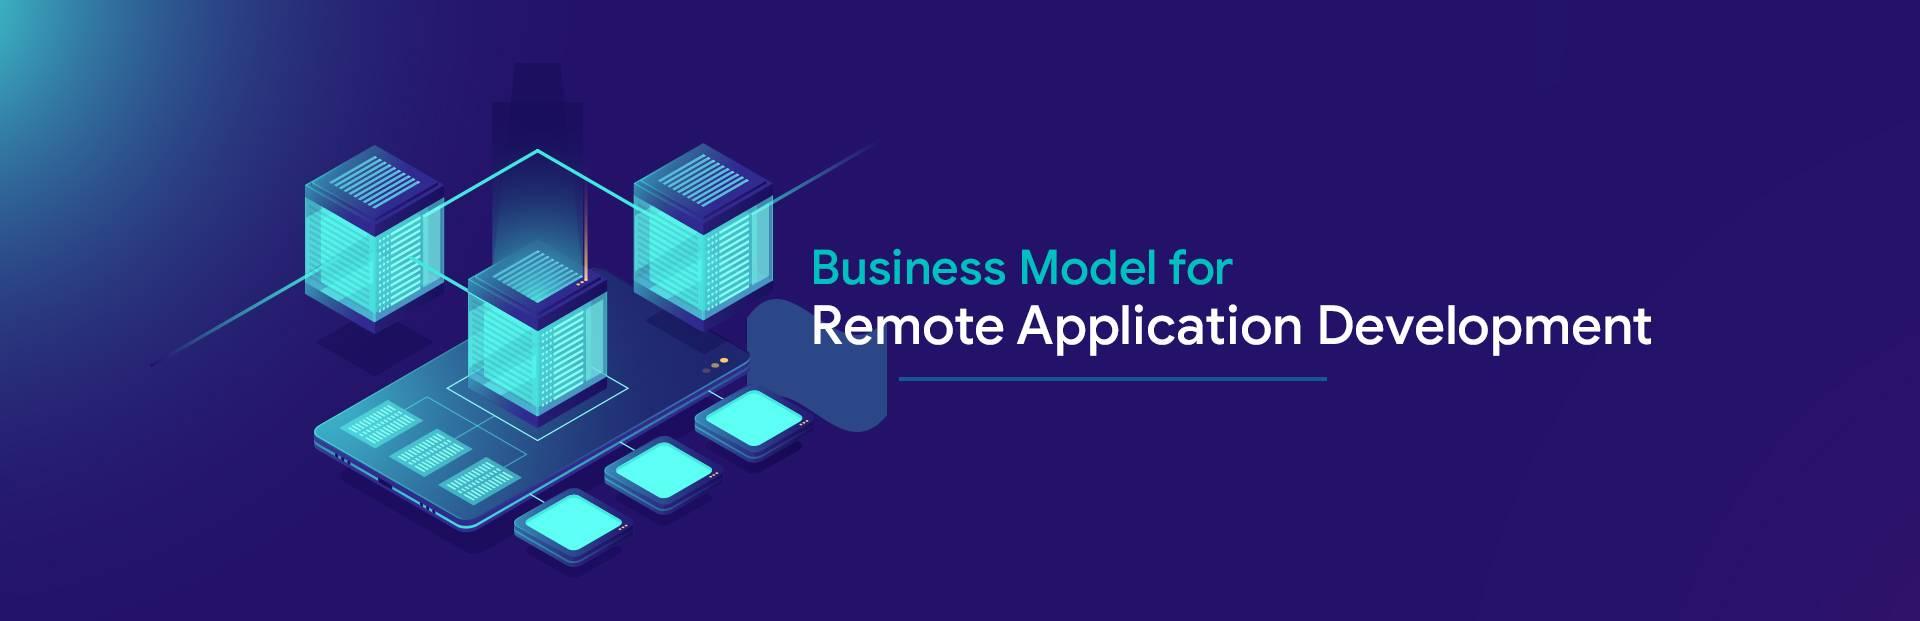 Which business model is better for remote application development?